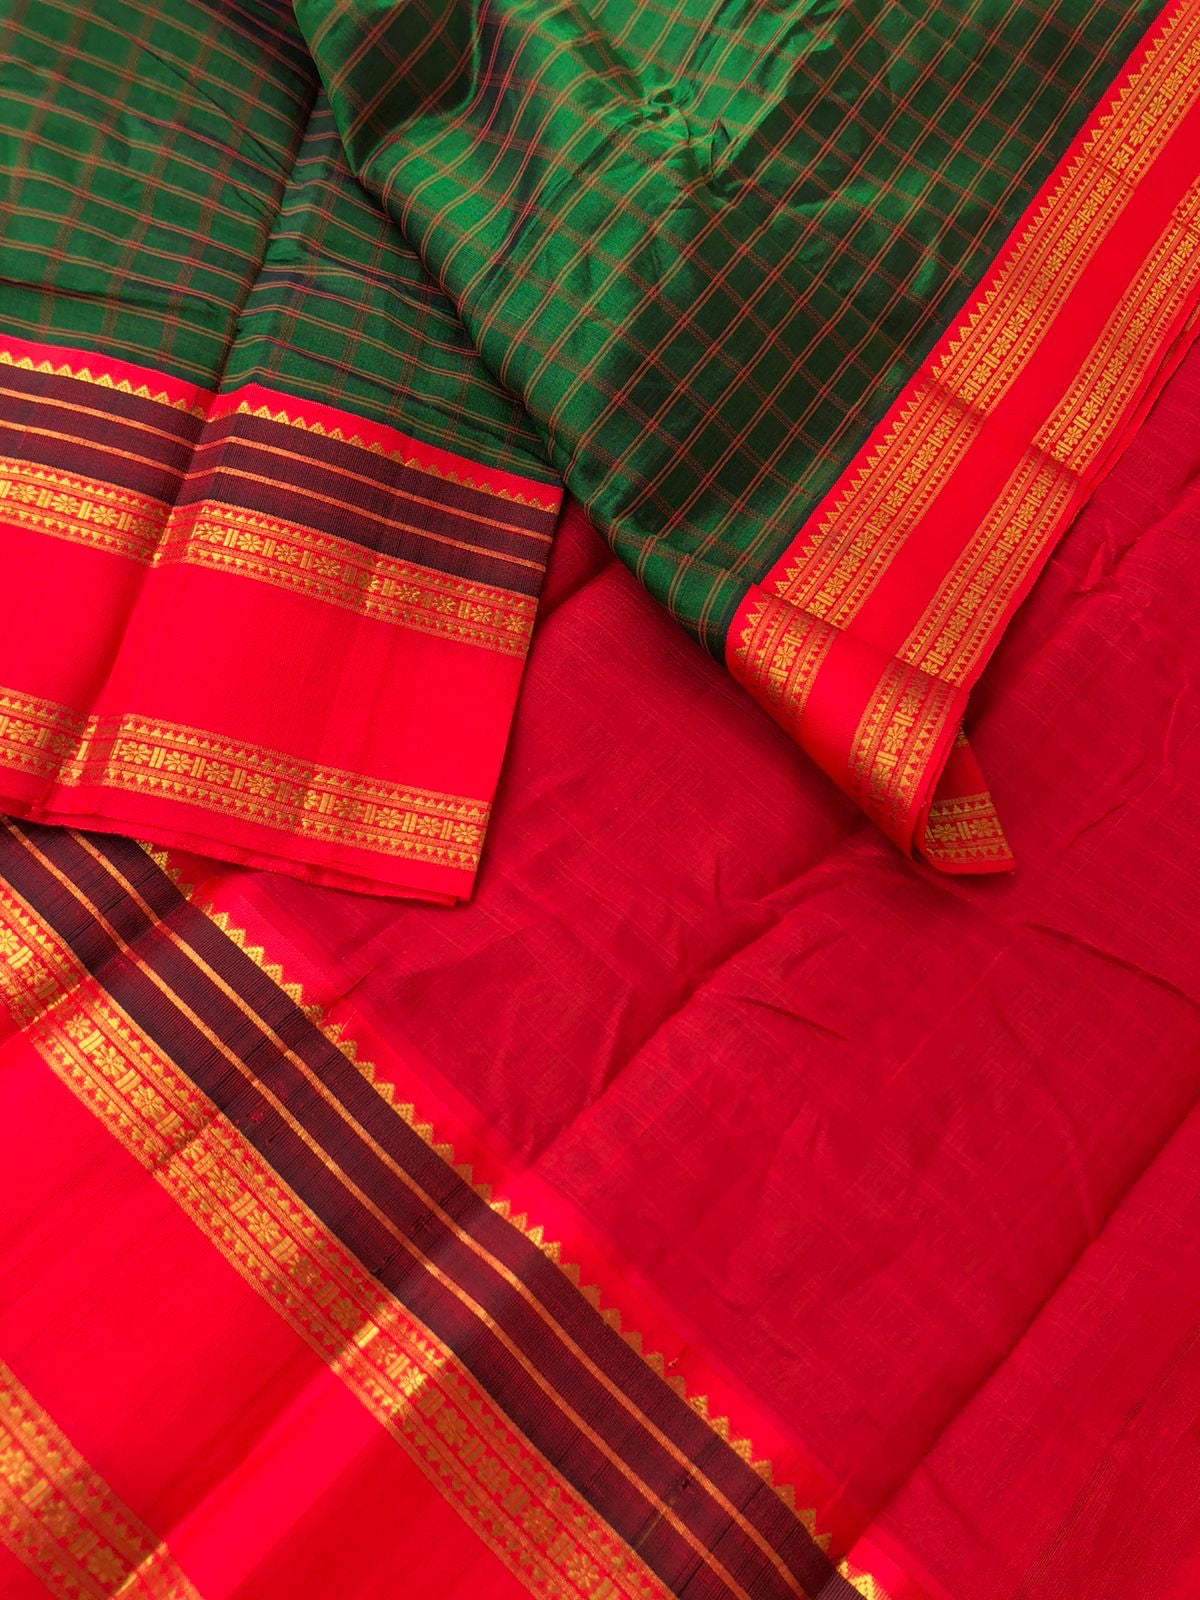 Divyam - Korvai Silk Cotton with Pure Silk Woven Borders - the deepest Meenakshi green and deep red is absolutely stunning